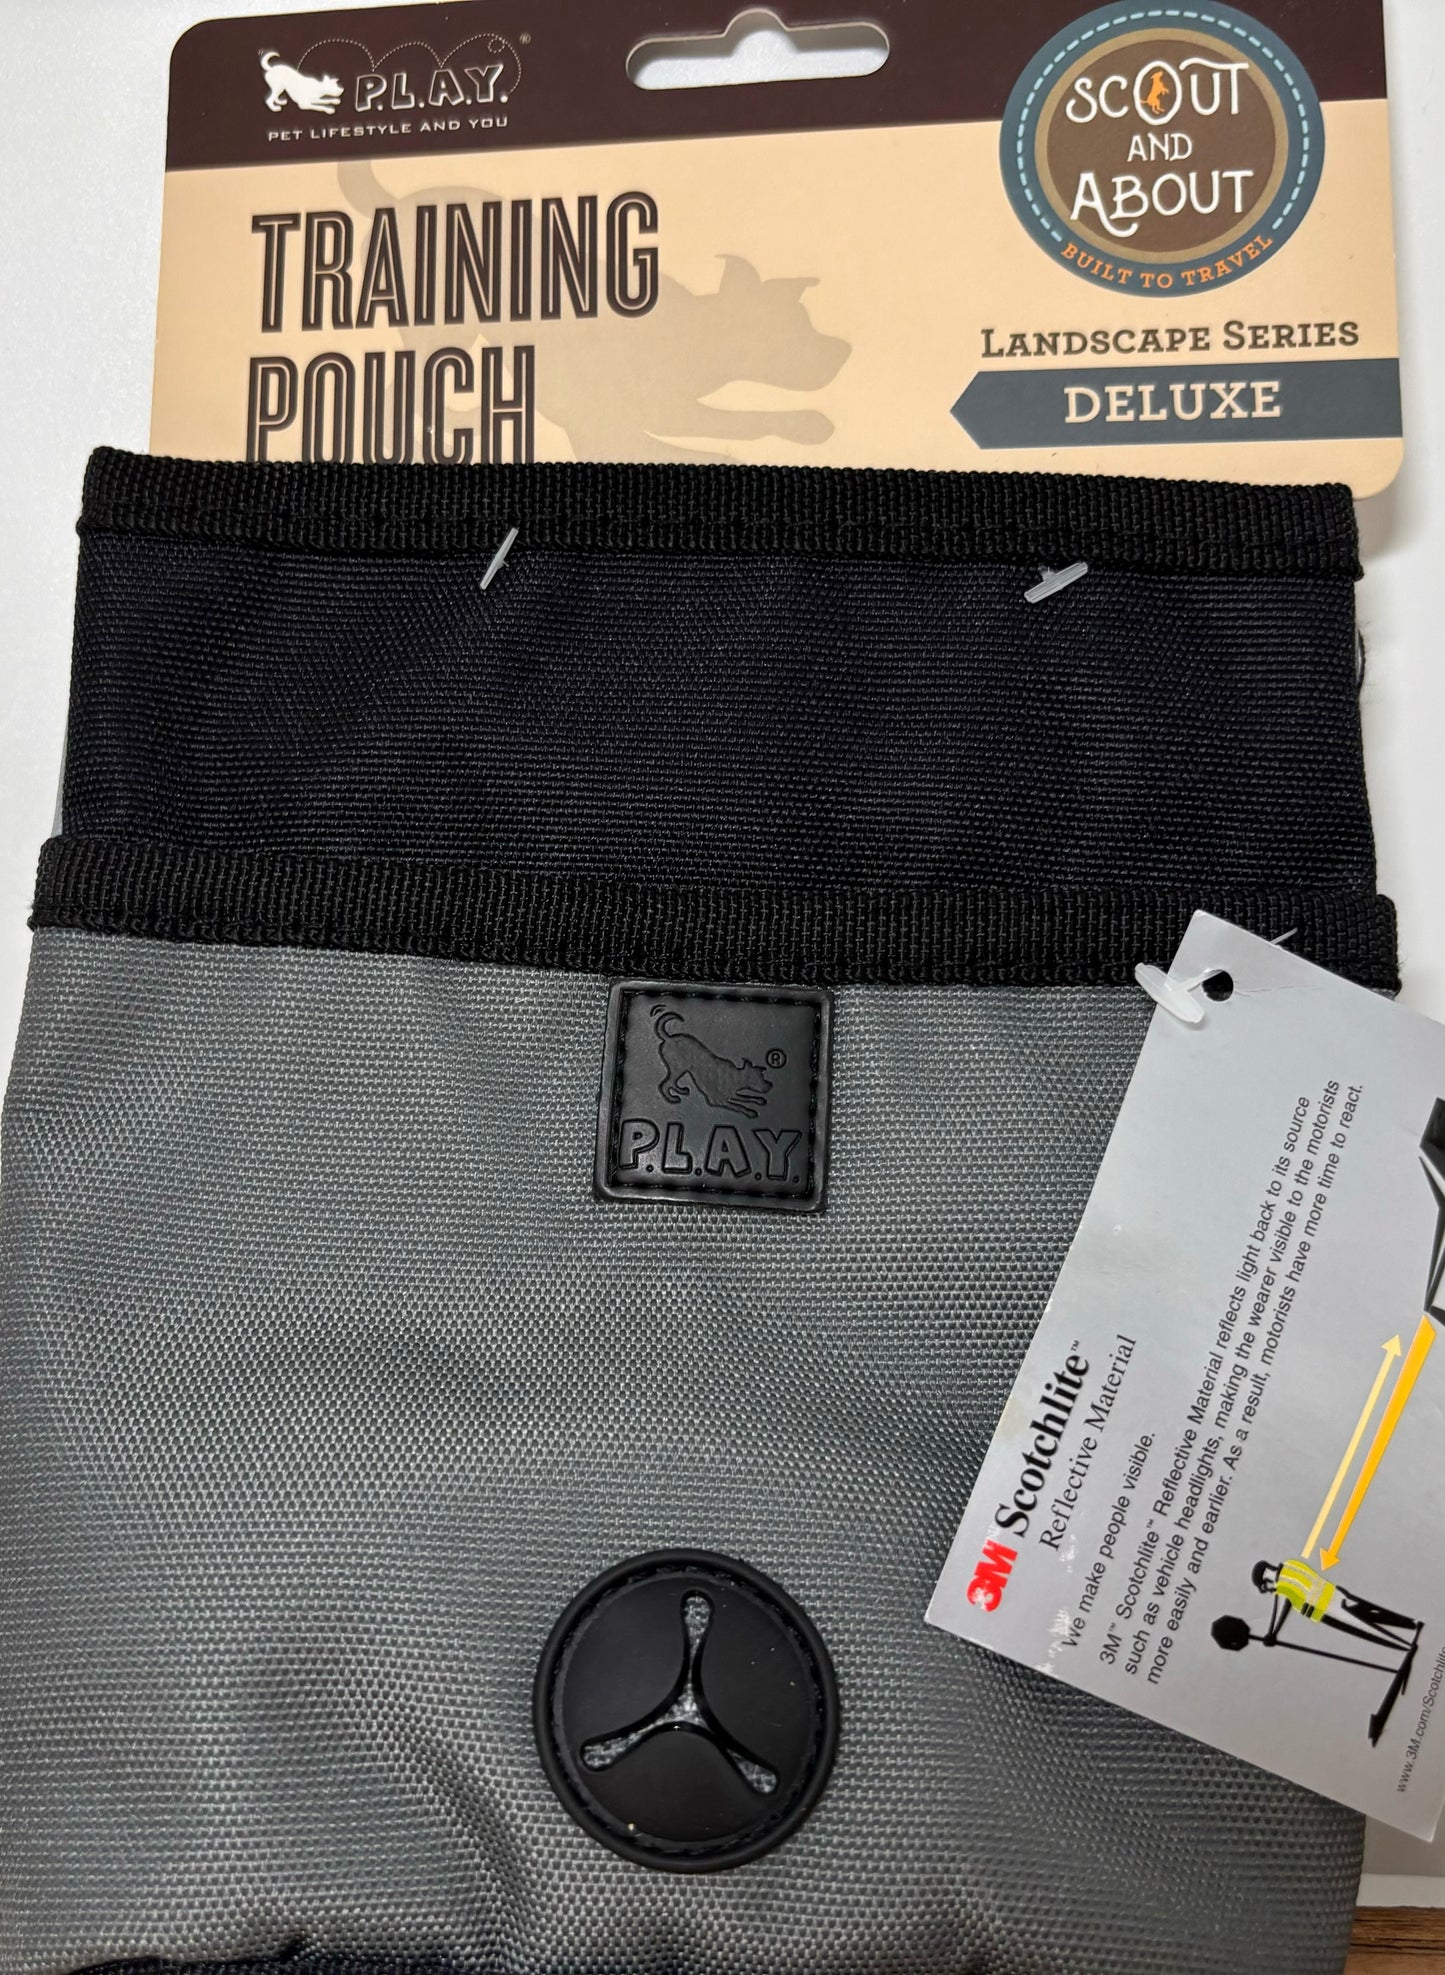 Training pouch